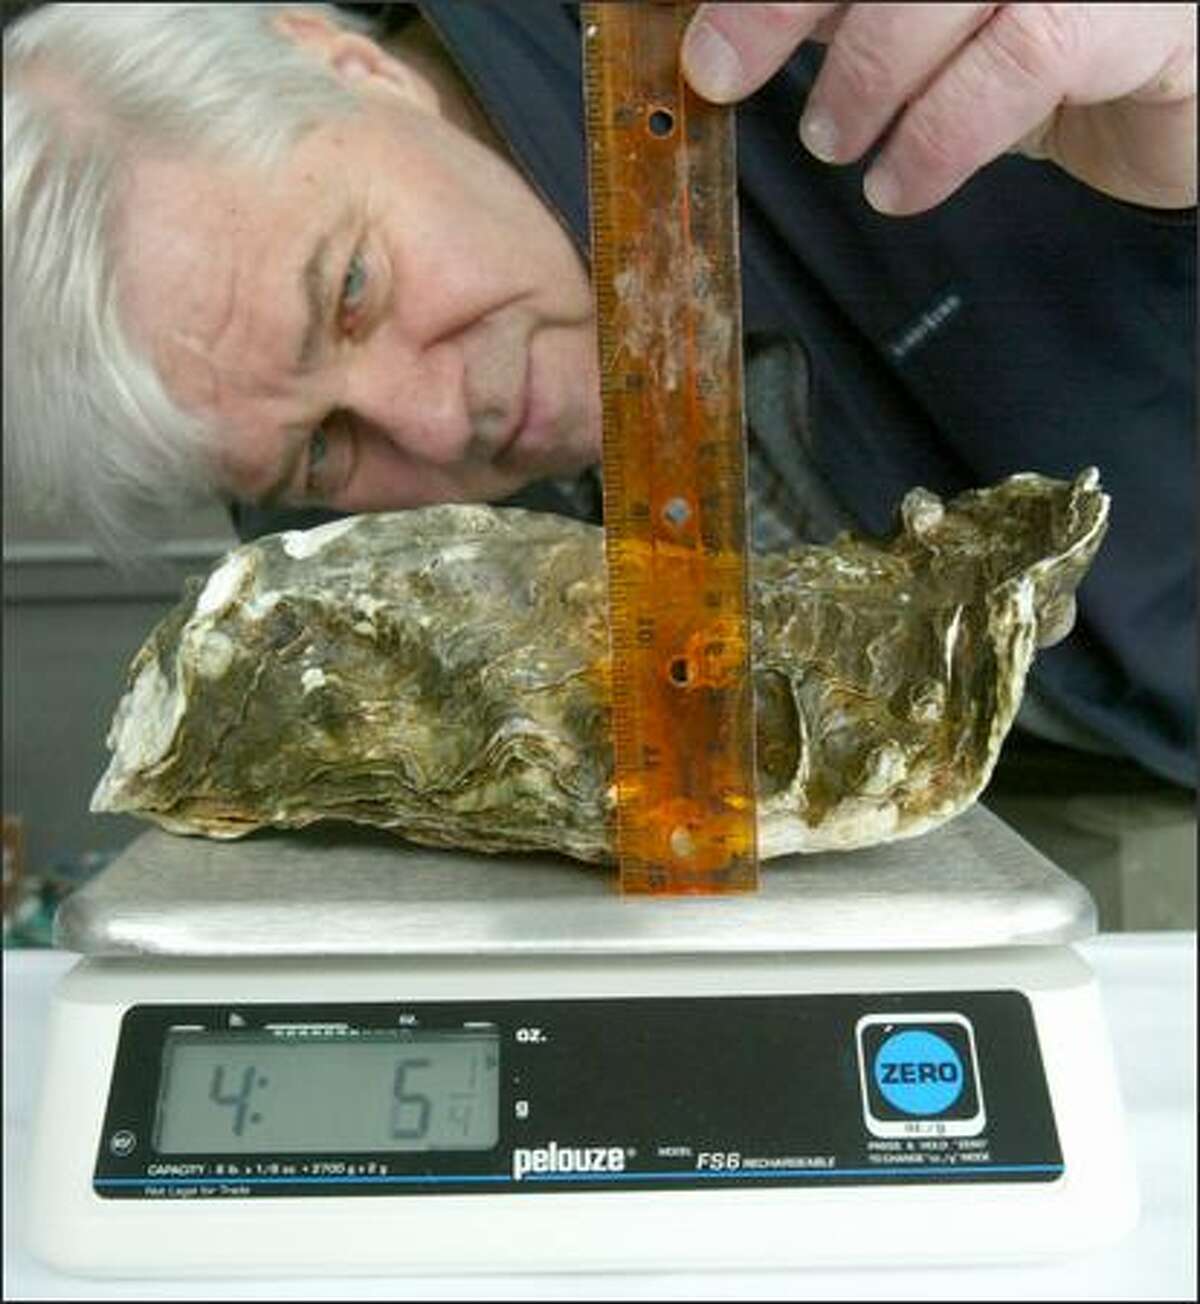 Jon Rowley, master of ceremonies Tuesday for the 17th Annual Anthony’s Oyster Olympics, checks the height of an entry in the largest oyster contest. Although the weight of the rule is added to the scale in this picture, the official weight of the Pacific oyster was 3 pounds, 14 ounces. The winner, a tad heavier, was picked by Arthuro Martinez of Taylor Shellfish. More than 800 dozen regular-size oysters were weighed, identified, shucked, barbecued or eaten raw, and most went home in the bellies of about 550 people at the sold-out event at the Anthony’s restaurant at 6135 Seaview Ave. N.W. The festivities benefited the Puget Soundkeeper Alliance.